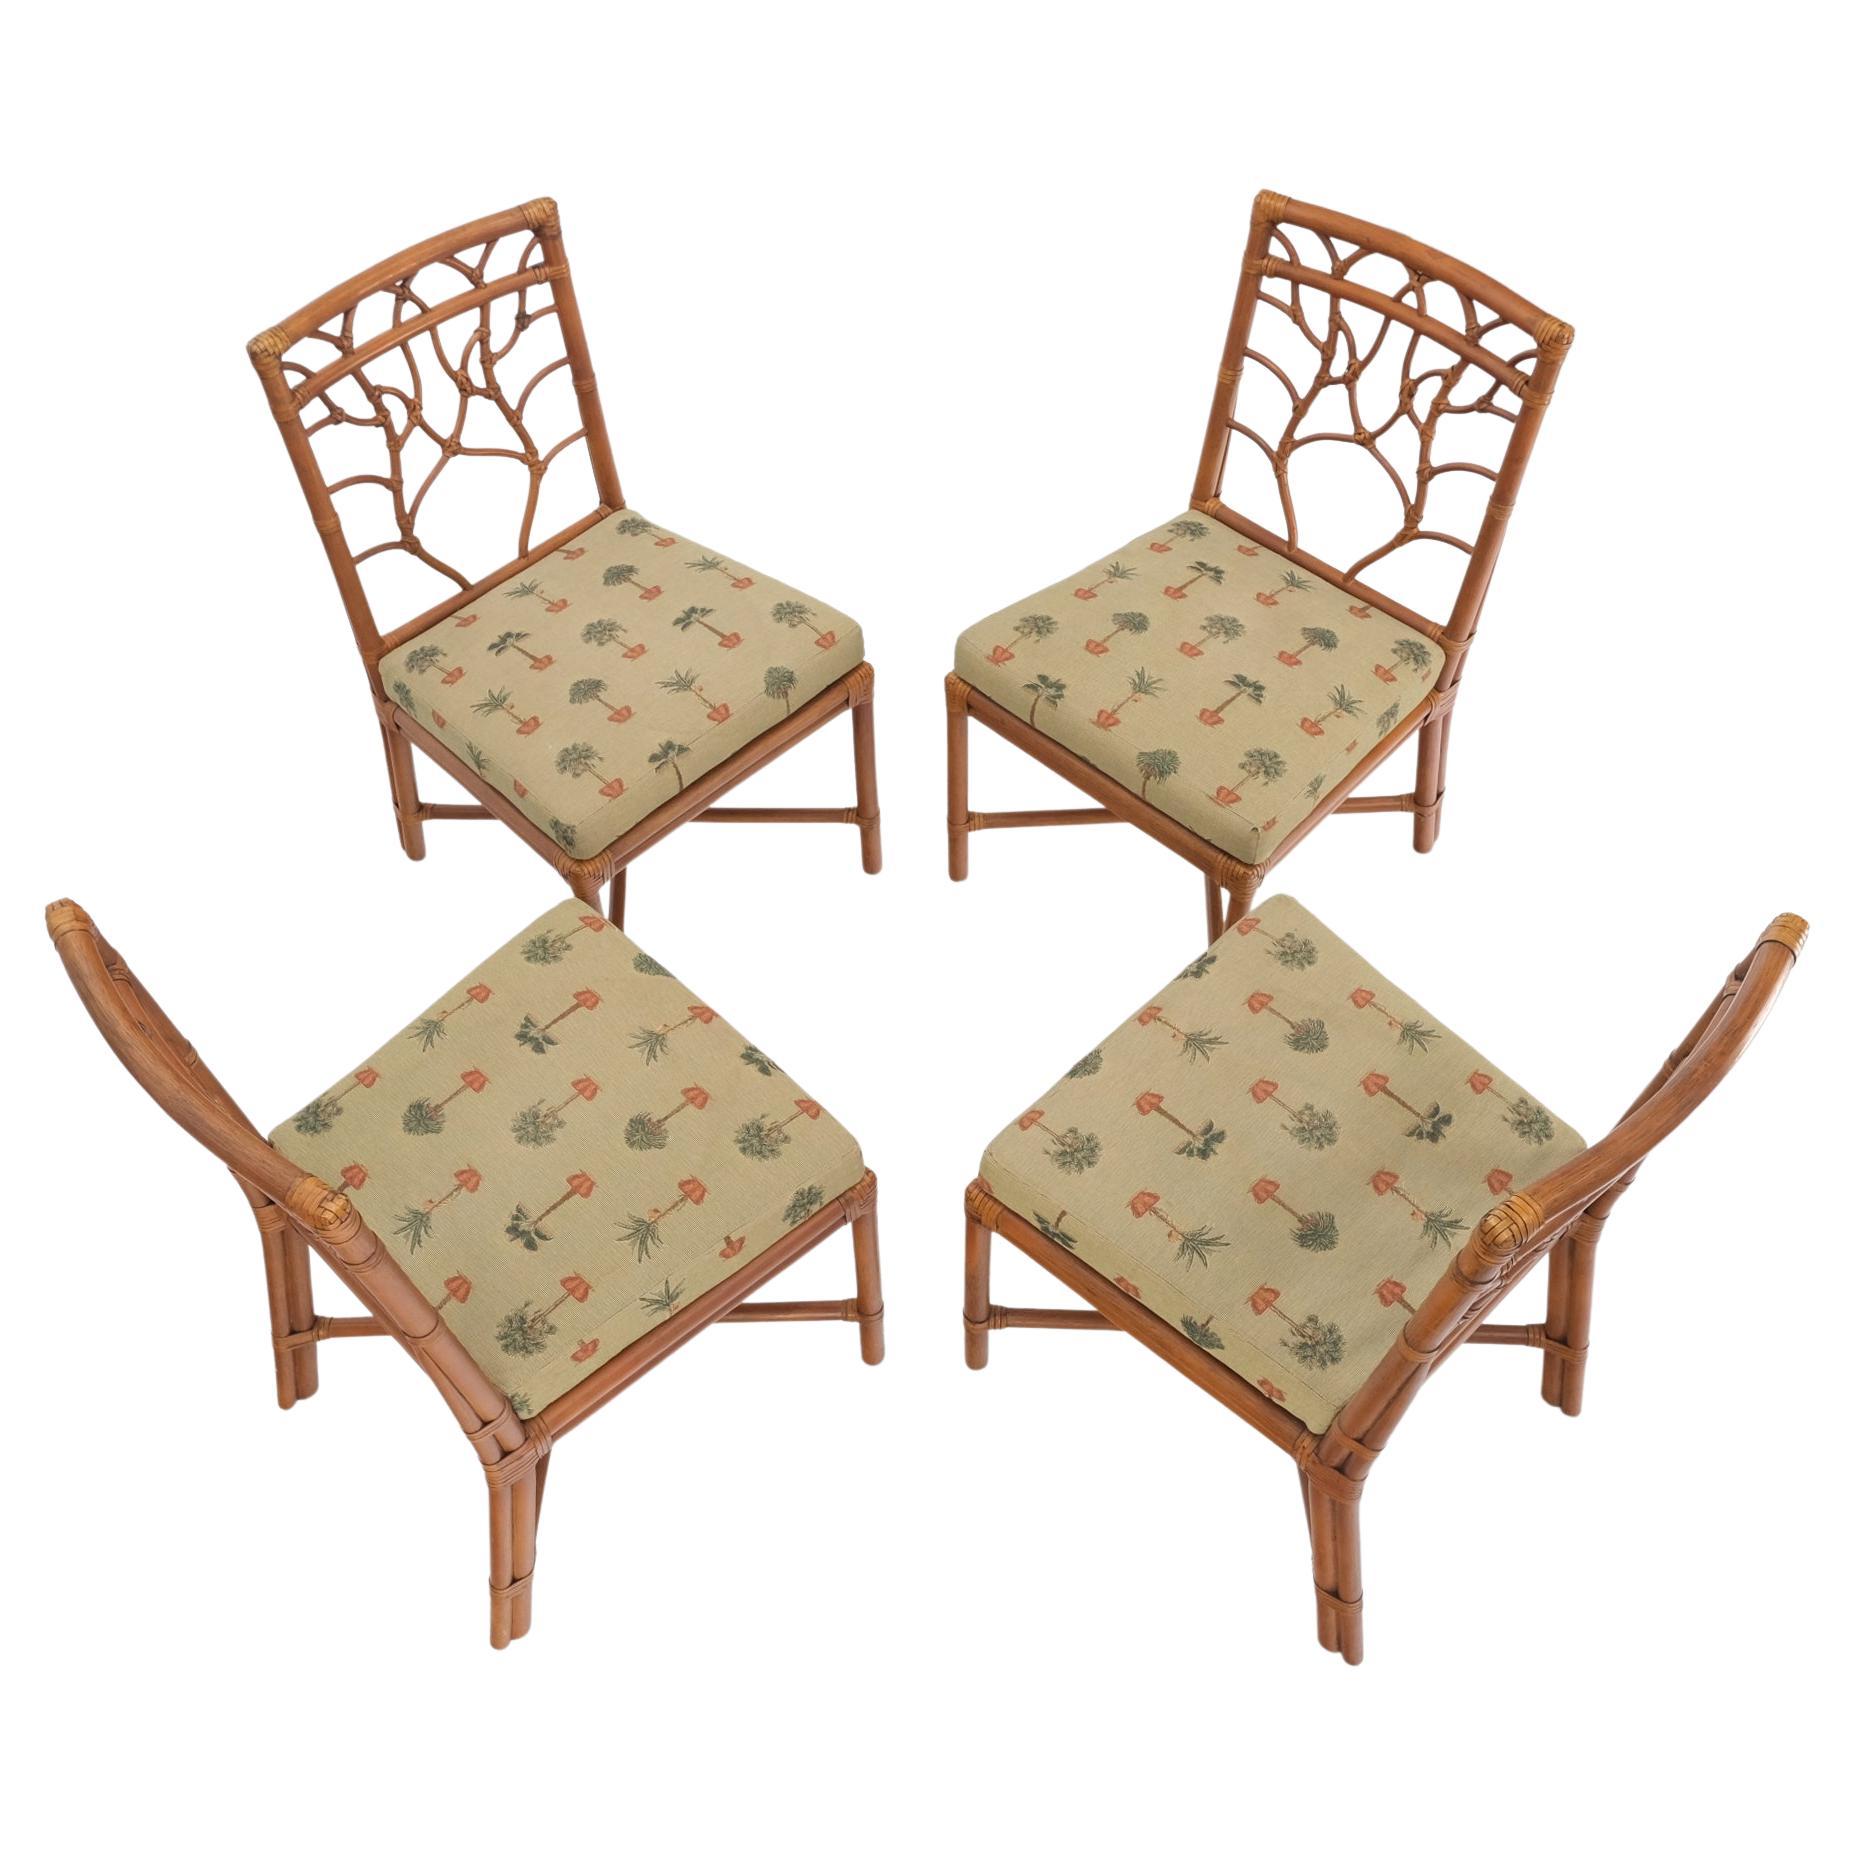 Set of 4 Bamboo Mid-Century Modern Dining Chairs MINT!